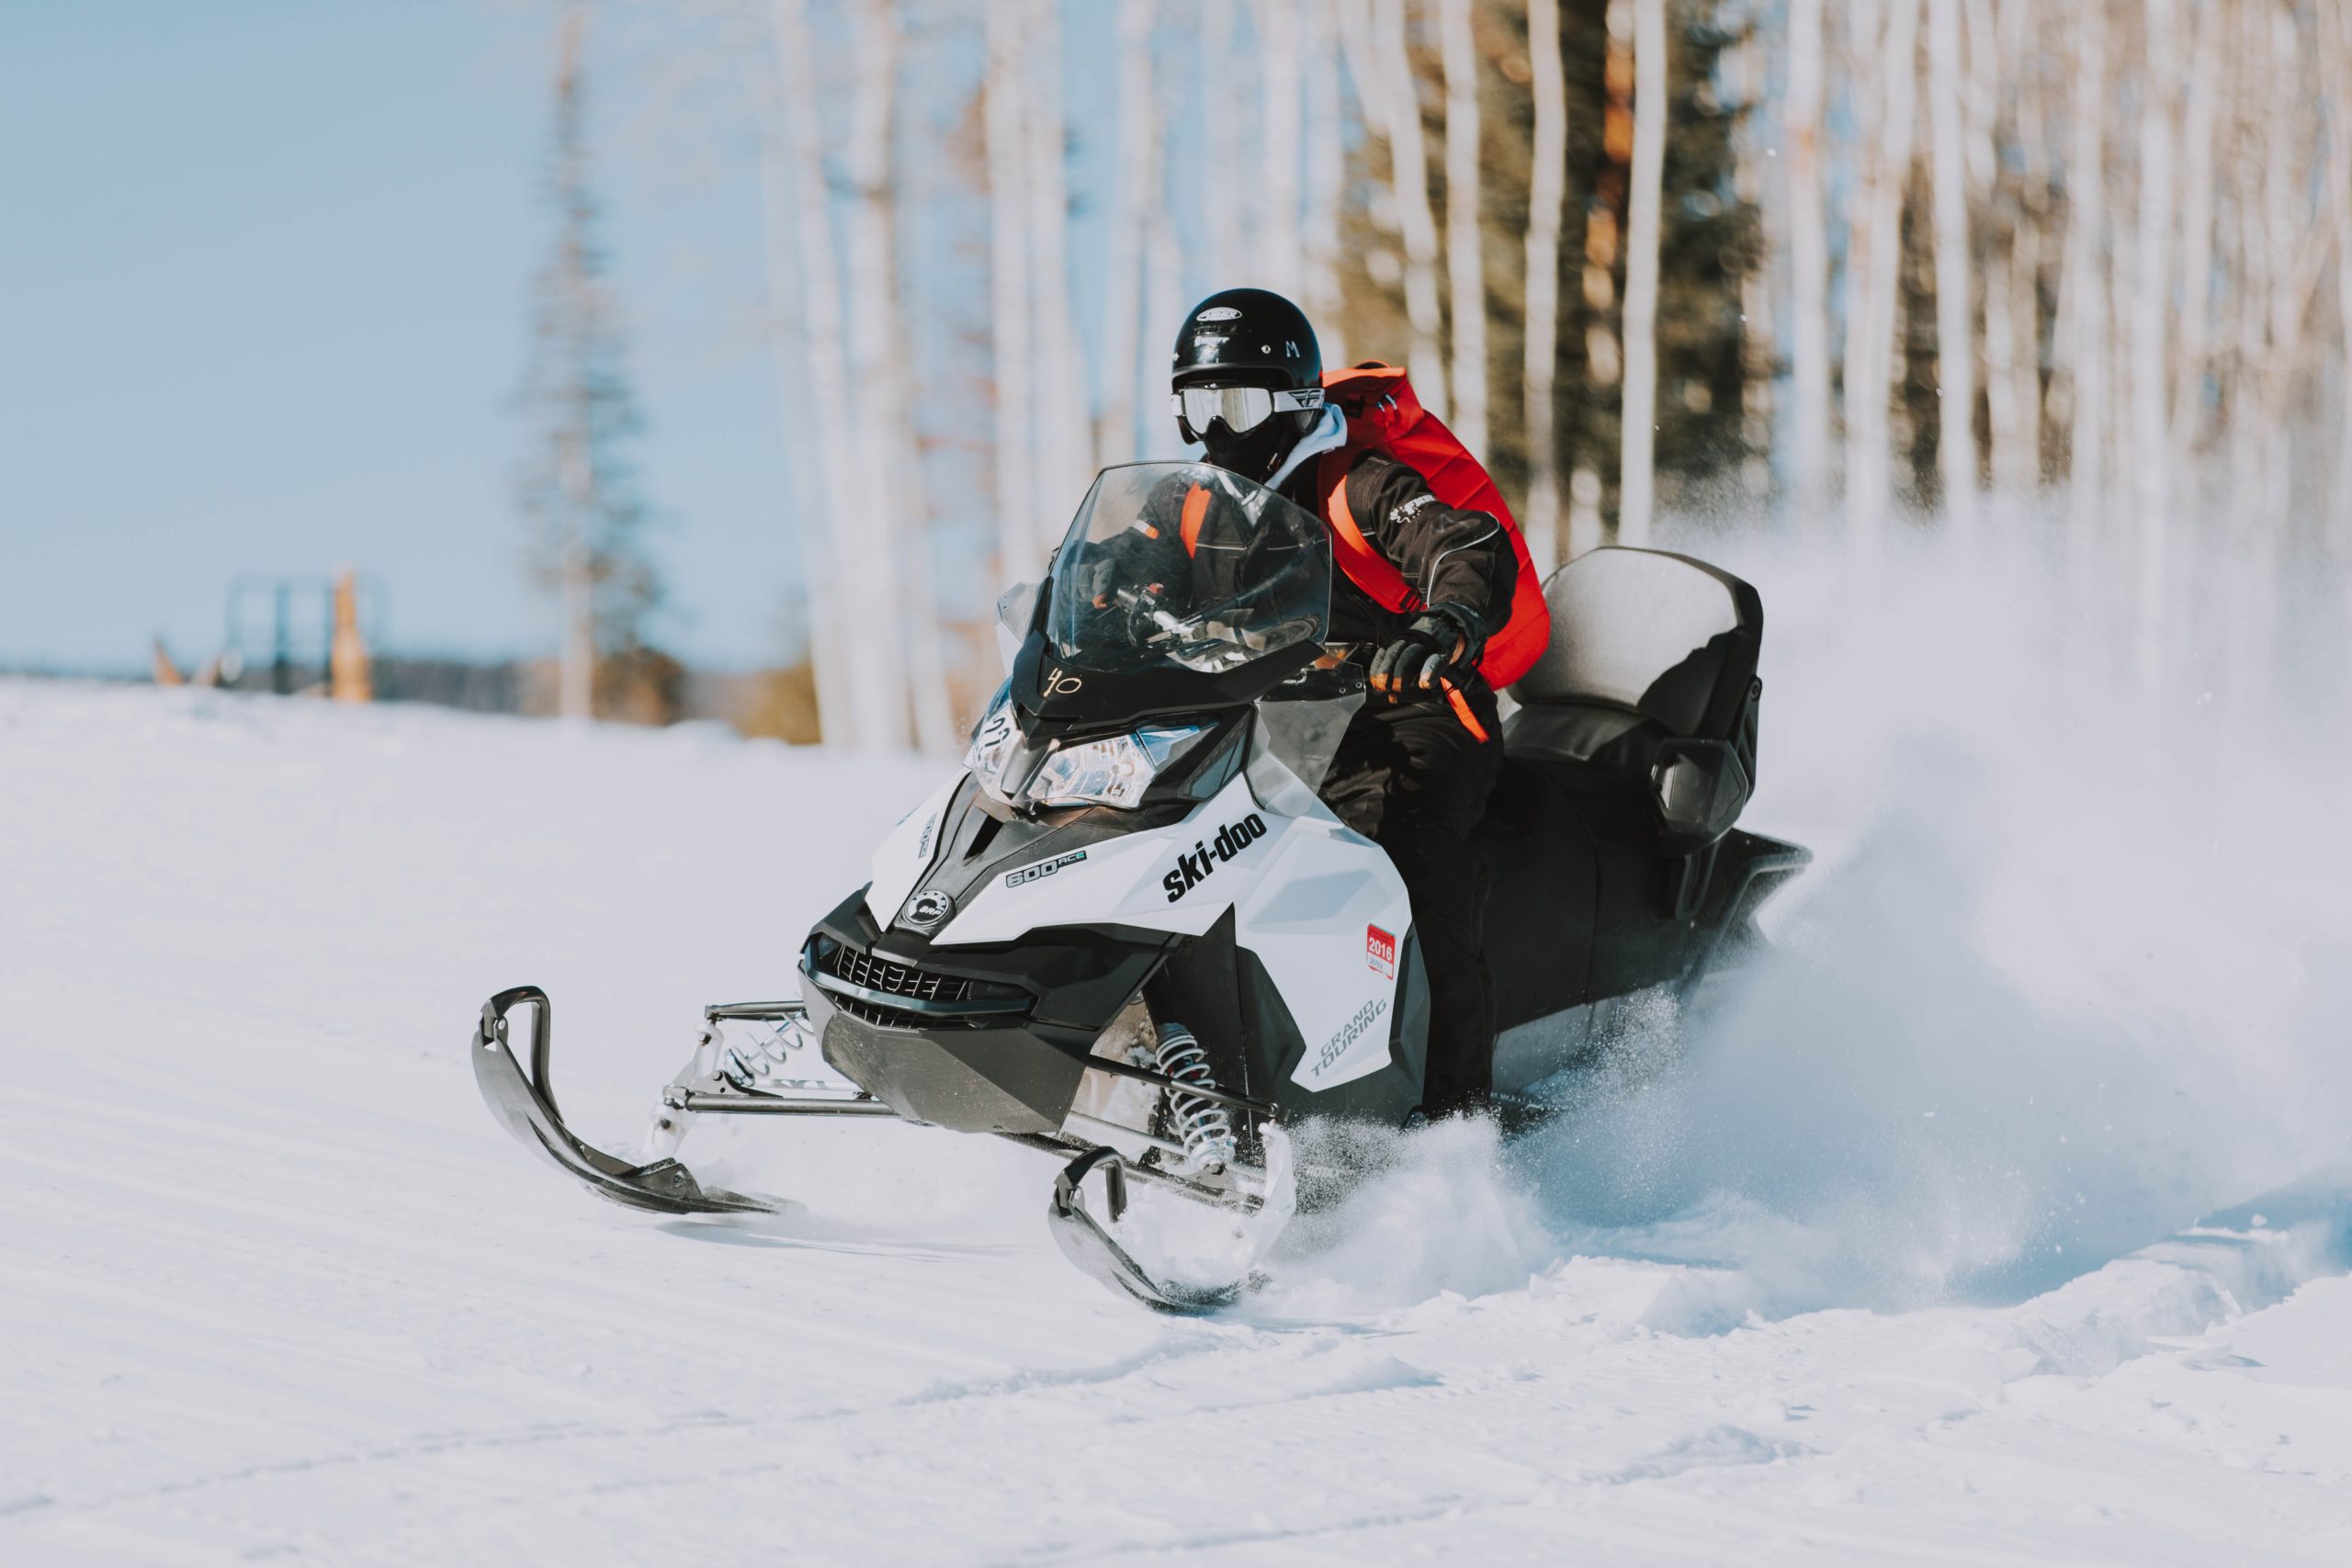 Top 5 Fastest Snowmobiles MADRAMPS